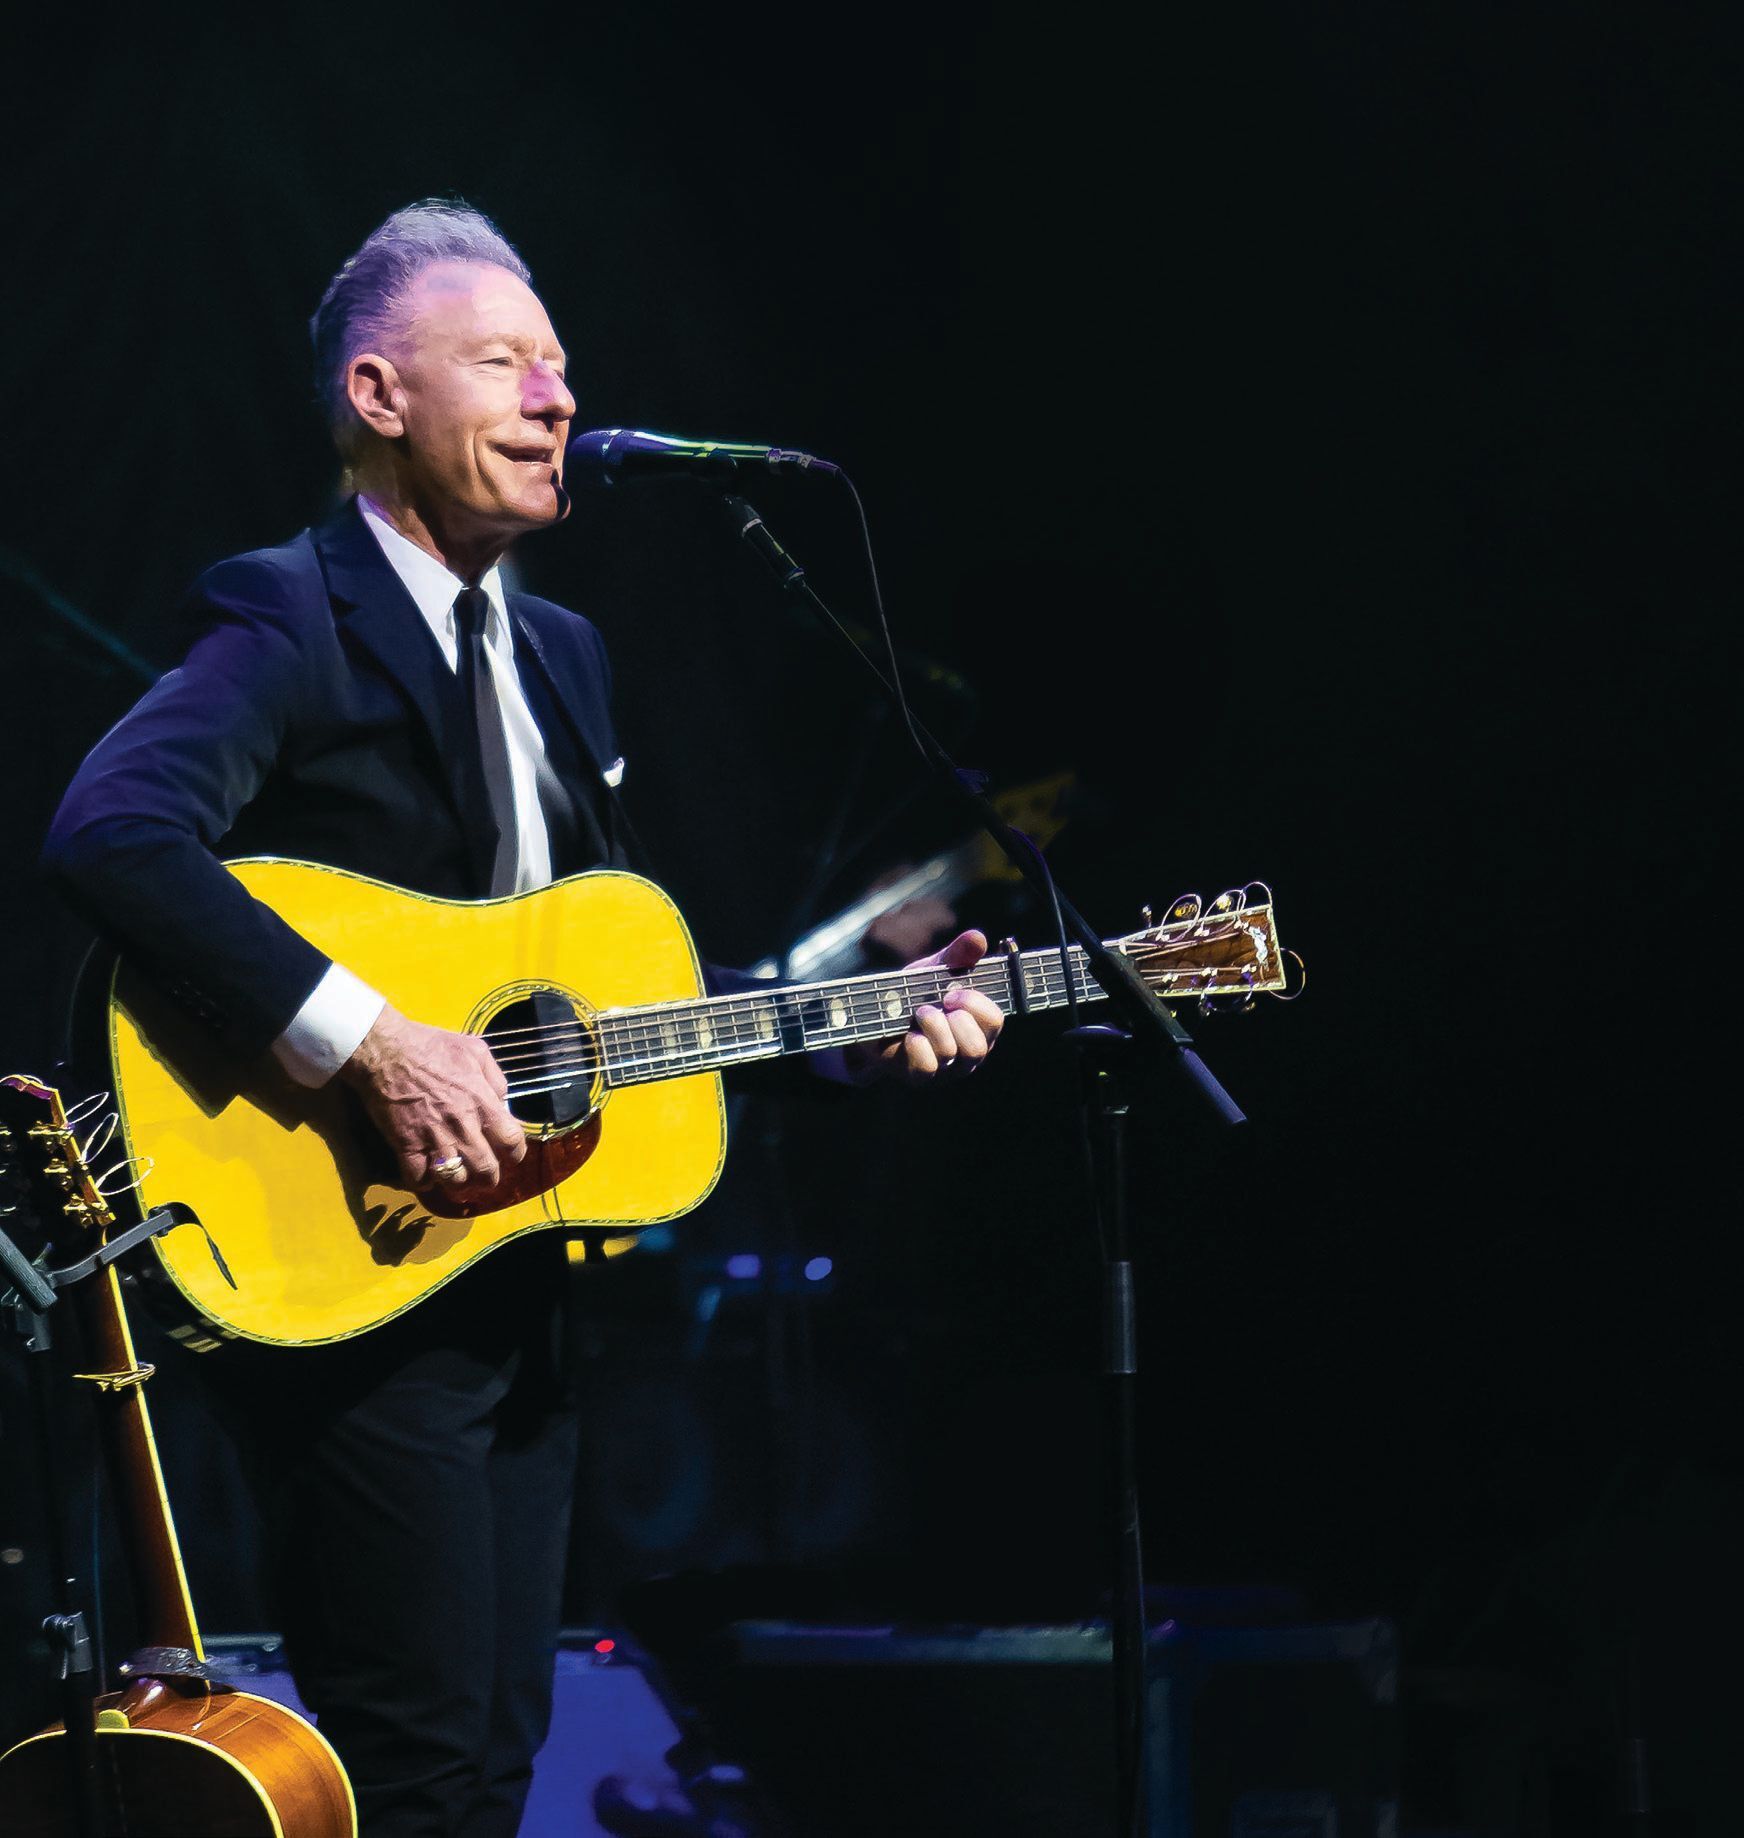 Lyle Lovett ends the night on the perfect note at Muny. PHOTO BY TYLER SCHMITT